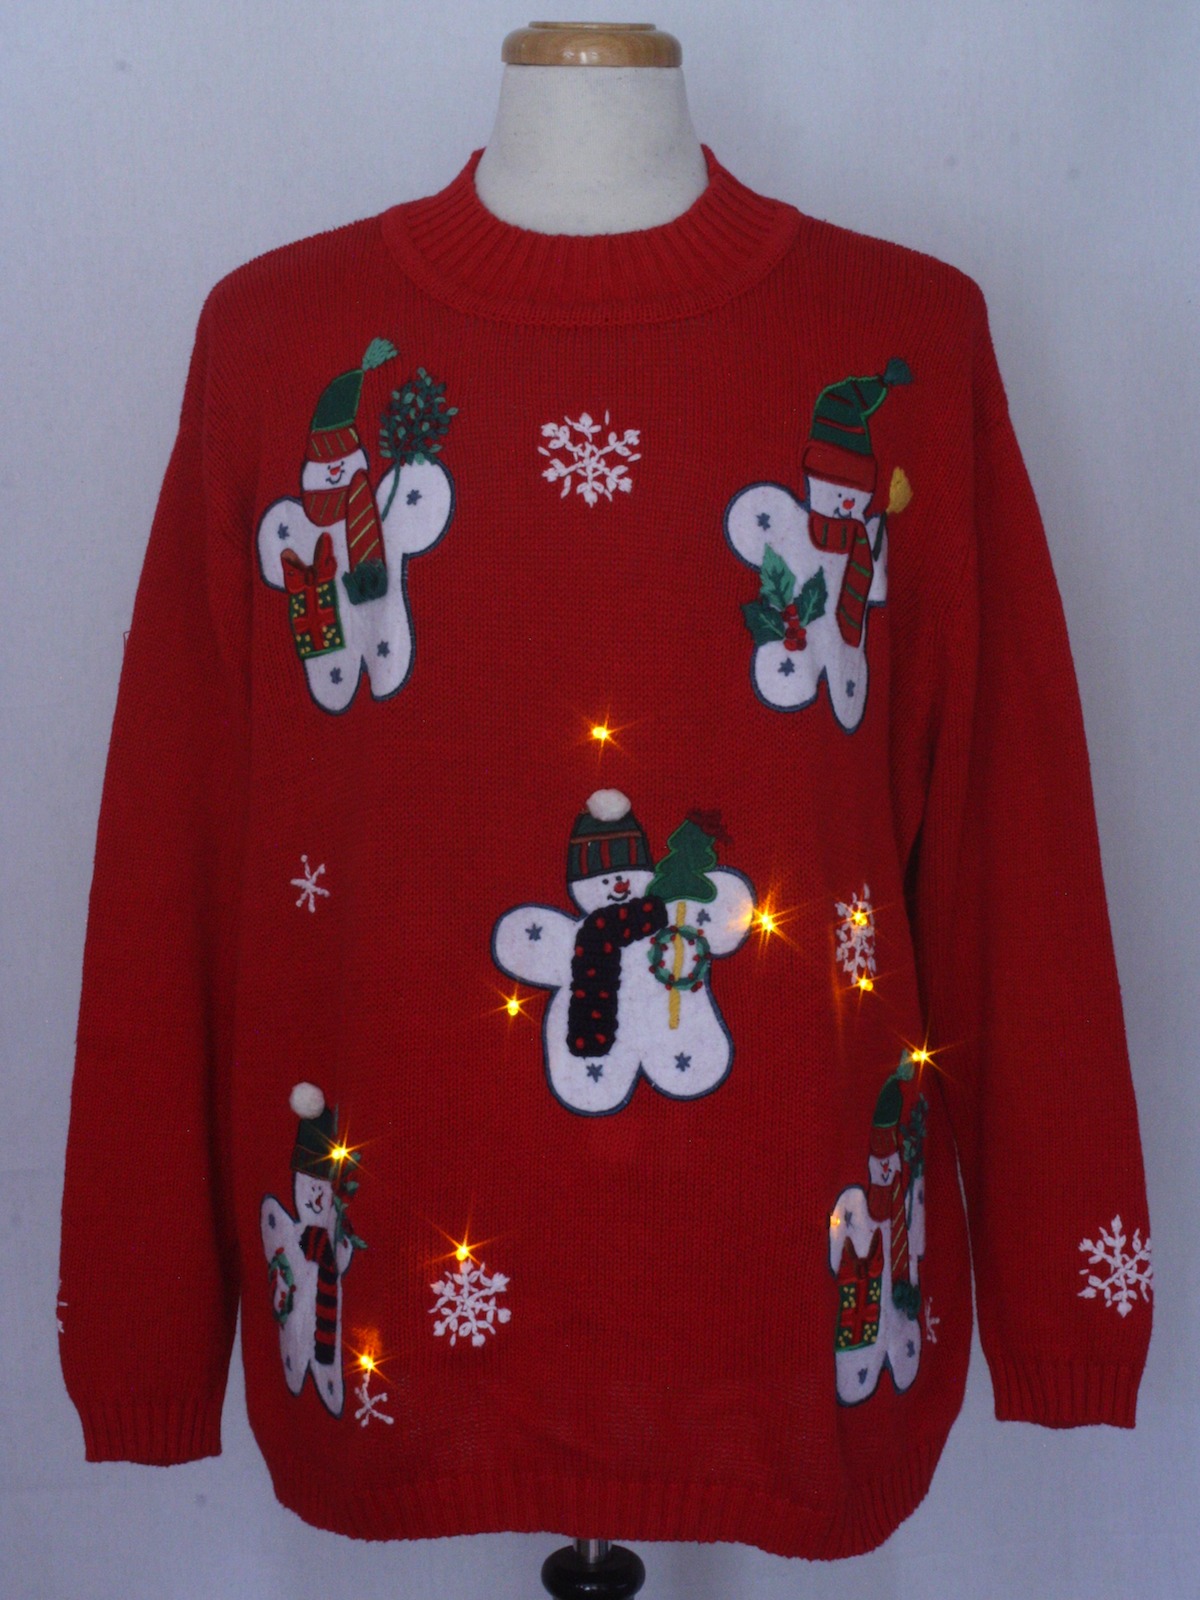 Amber Lightup Ugly Christmas Sweater: -Bedford Fair- Unisex red ...